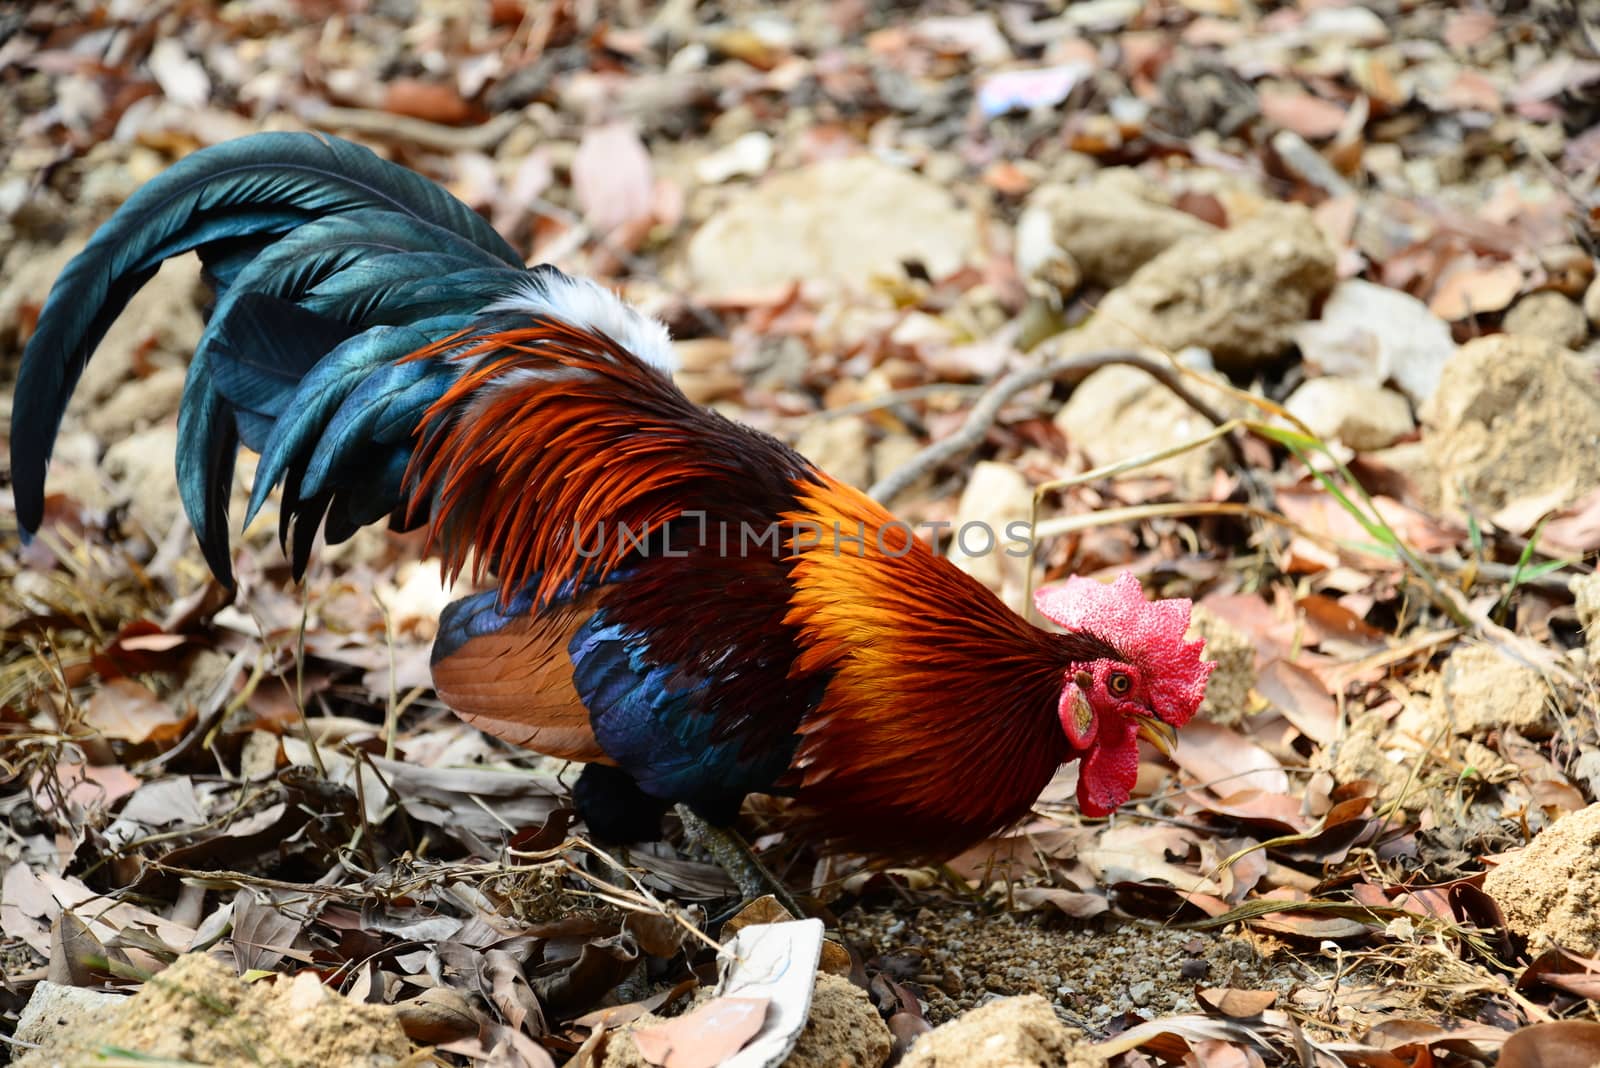 The Beautiful Red Rooster walking on the ground